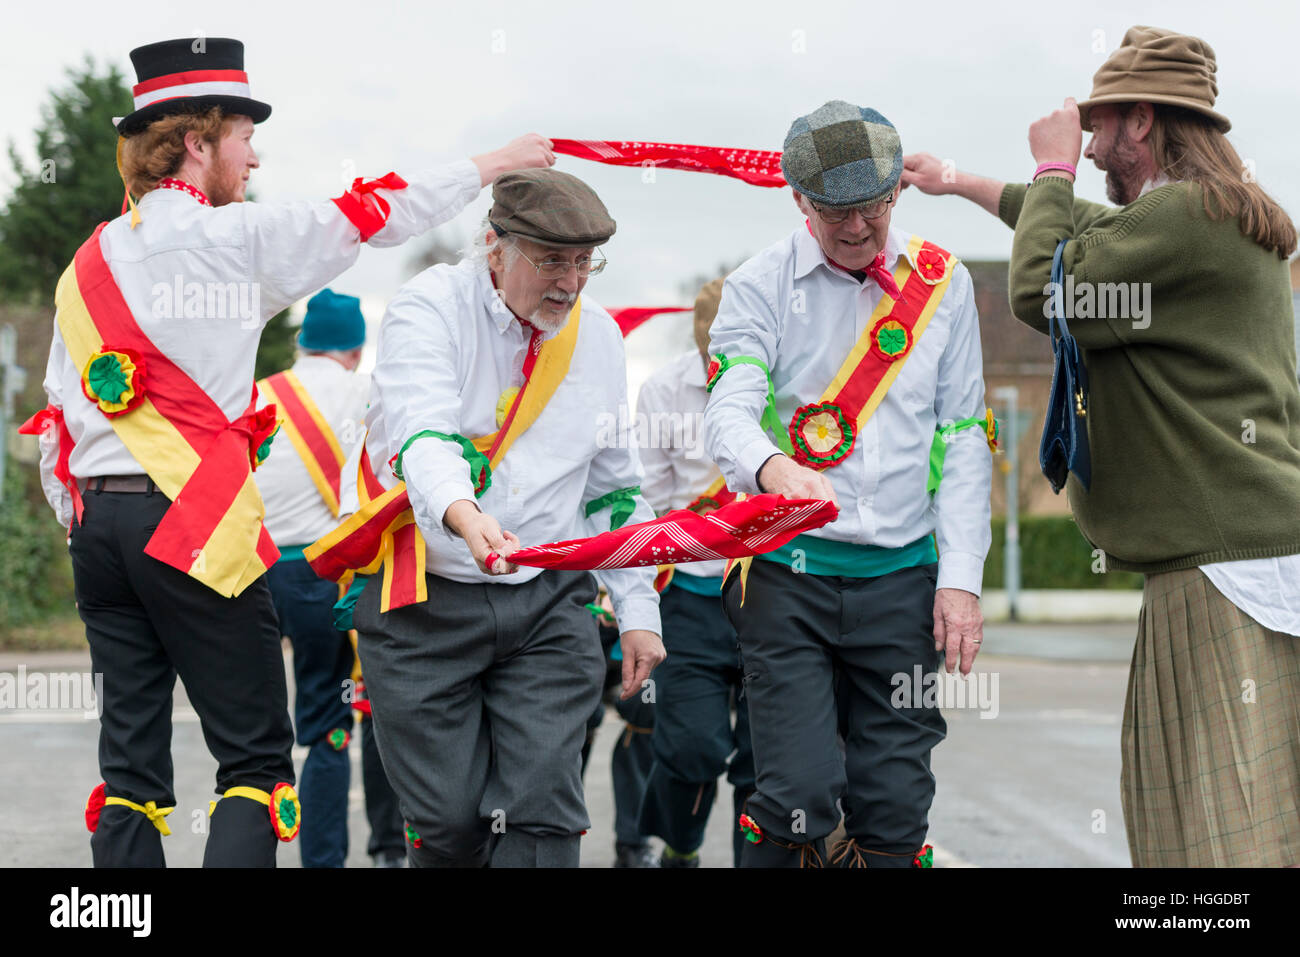 Comberton Cambridge UK 9th January 2017. The Cambridge Morris Men perform a Molly dance in the street to celebrate Plough Monday, the traditional start of the new agricultural year on the first Monday after Epiphany, the Twelfth Day of Christmas. This is a tradition popular in East Anglia. Today the group performed at schools and will join up other dancers to continue celebrations in local pubs. Credit Julian Eales/Alamy Live News Stock Photo